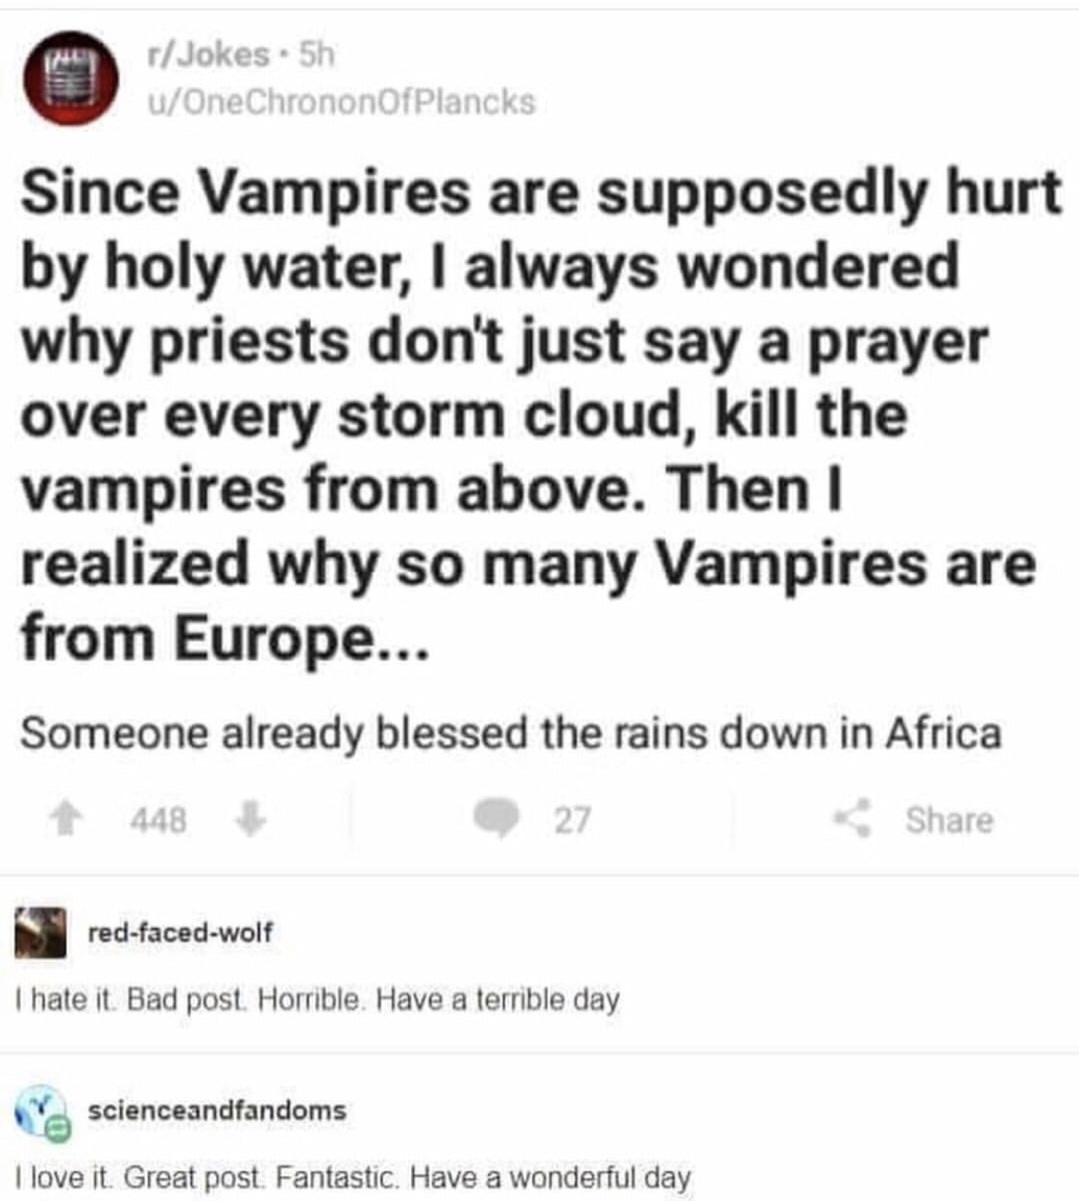 written memes - rJokes. 5h uOneChrononOfPlancks Since Vampires are supposedly hurt by holy water, I always wondered why priests don't just say a prayer over every storm cloud, kill the vampires from above. Then realized why so many Vampires are from Europ